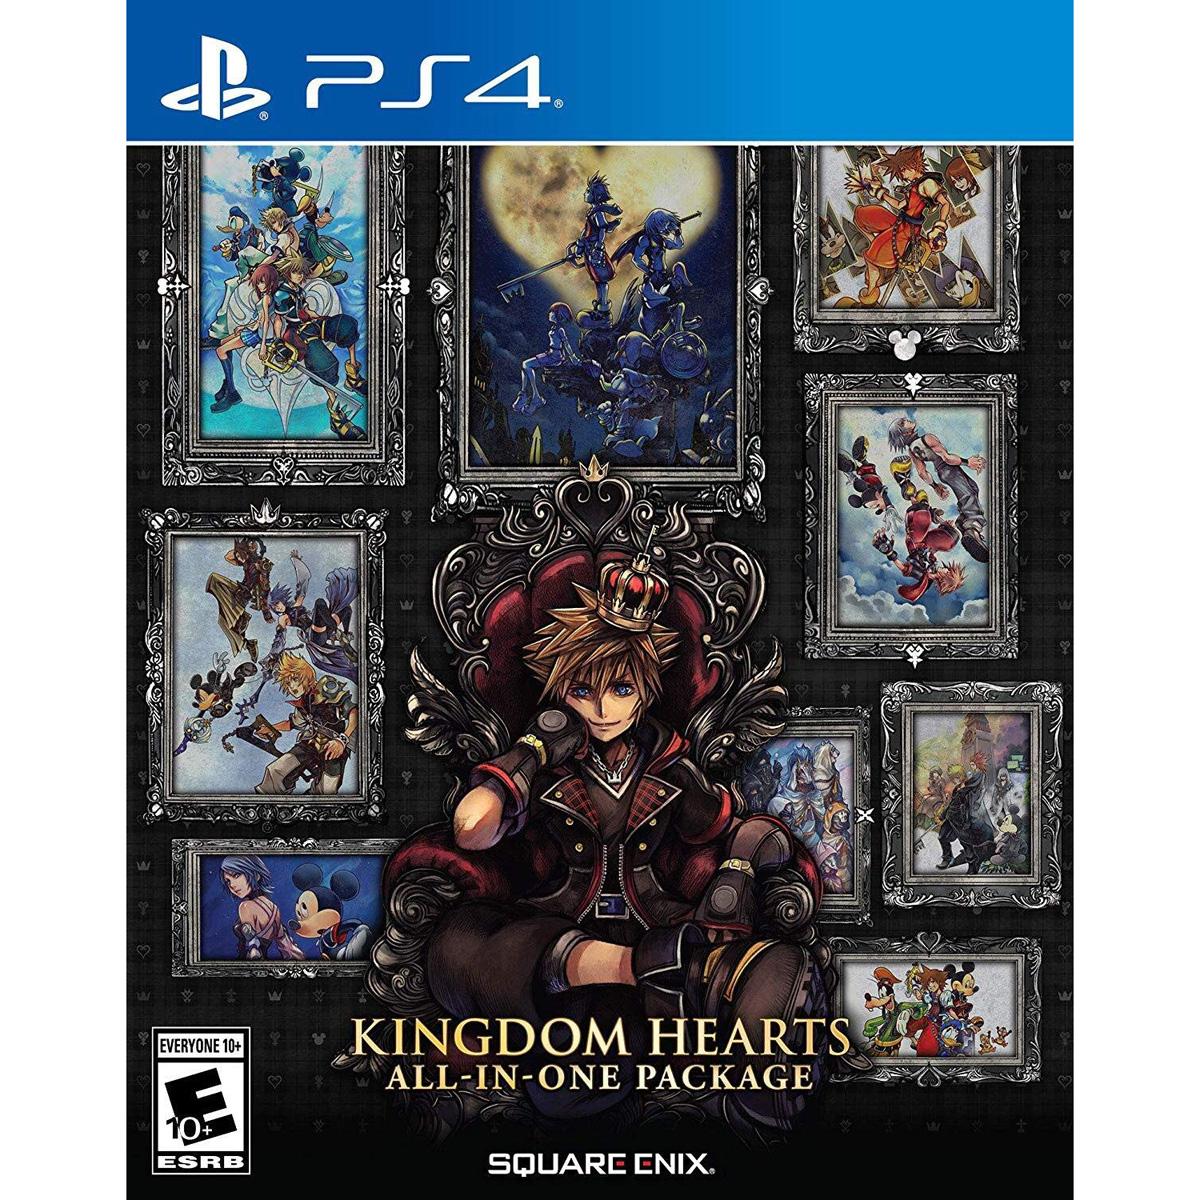 Kingdom Hearts All-in-One Package for $19.99